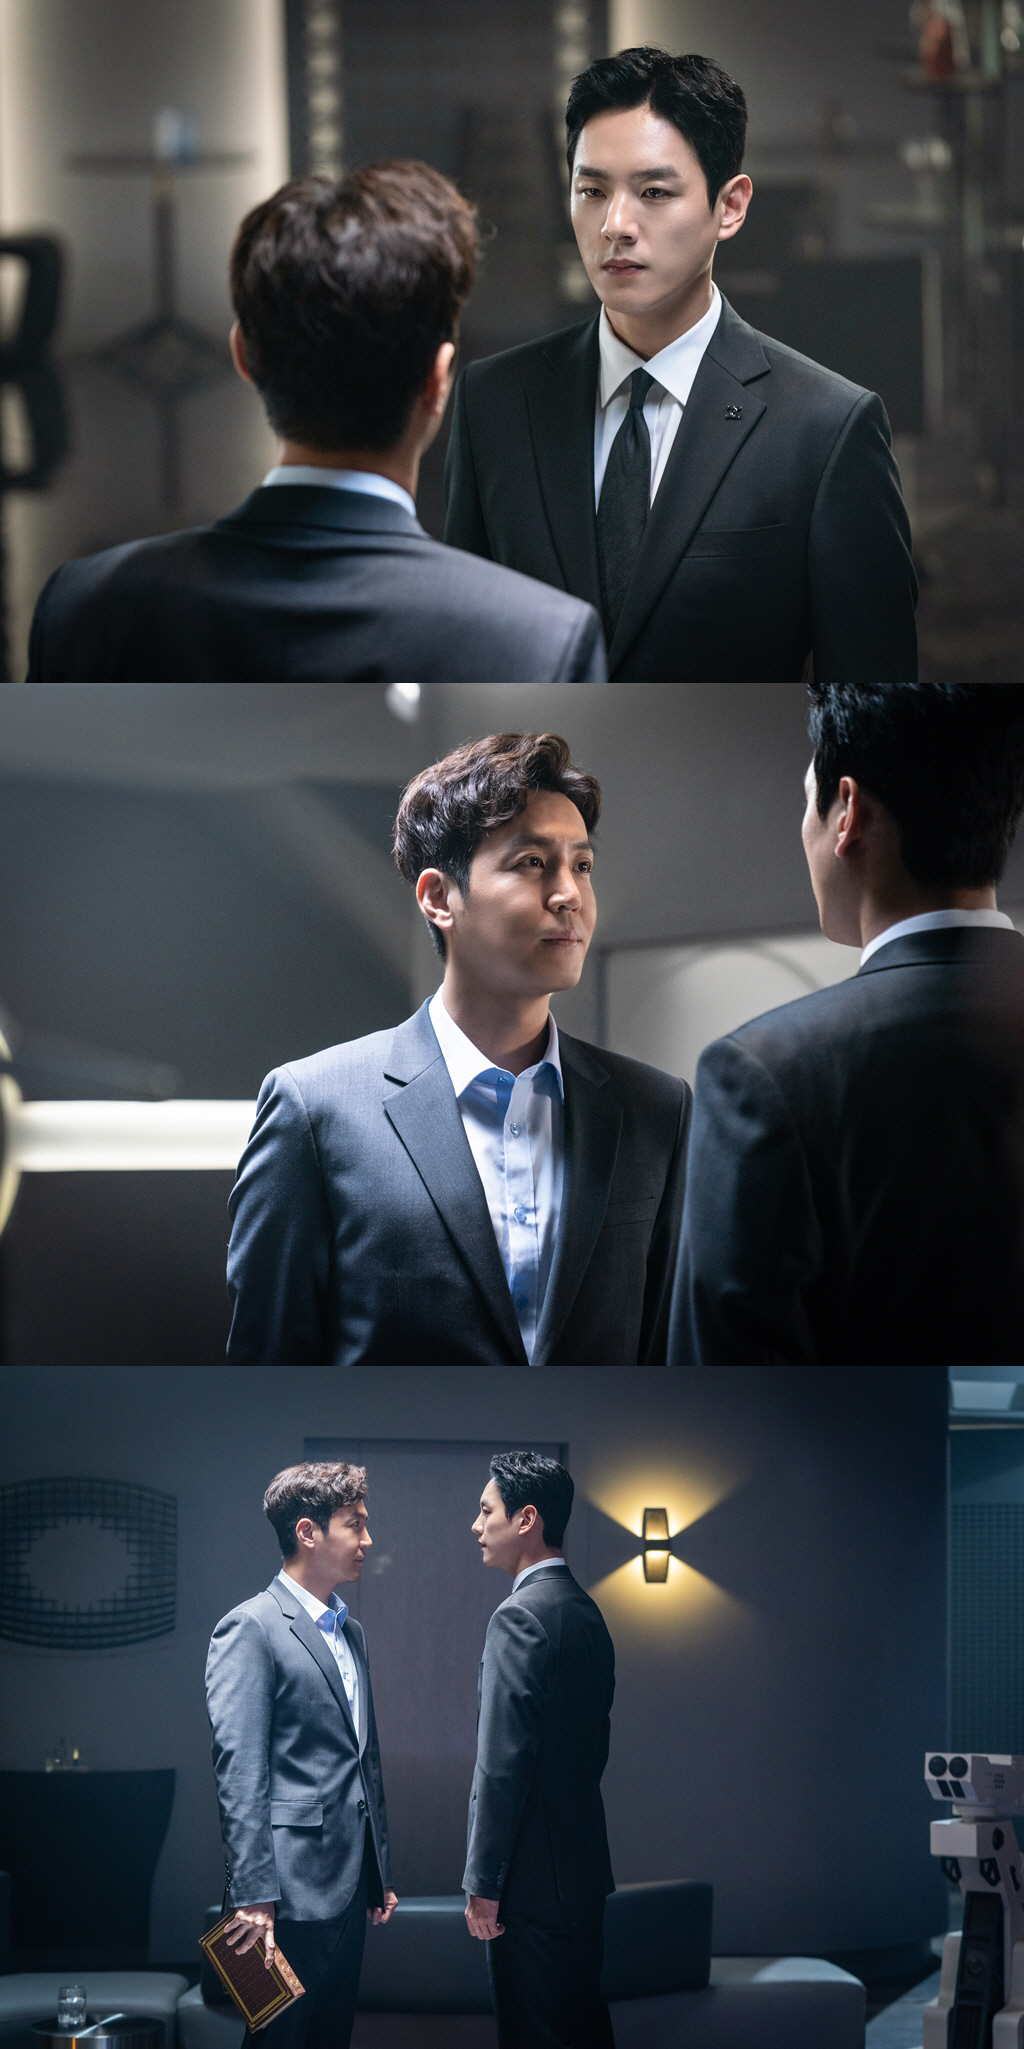 Alice Kwak Si-yang and Choi Won-young face each otherSBS gilt drama Alice (playplayplayed by Kim Gyu-One, Kang Cheol-gyu, Kim Ga-young/directed by Baek Soo-chan/production studio S/investment wave) is running toward the end.The attention of the house theater is focused on what the story will be told at the end of Alice, which has been unfolding beyond imagination since the first broadcast, and what the main characters thrown into the desperate fate vortex will end, and how powerful the audience will be.Meanwhile, on October 22, the production team of Alice unveiled the appearances of Yoo Min-hyuk (Kwak Si-yang) and Suk Oh (Choi Won-young) who faced each other a day before the 15th broadcast.The two people in the photo stand facing each other with a meaningful expression in what looks like Alice.Earlier, Yoo Min-hyuk later heard a message left by Park Sun-young (Kim Hee-sun) before he died in 2010.Park Sun-young told me all about why he disappeared in 1992, how he gave birth to his child, Park Jin-gyeom (one of the state), and how he missed Yoo Min-hyuk.And I asked Yoo Min-hyuk to keep their son, Park Jin-gum, and Yoo Min-hyuk shed tears of regret and sadness in the message of Park Sun-young, who had already left the world.And somehow, he vowed to protect his son, Park Jin-gyeom.Meanwhile, Journey to the Center of Time, from the future, killed one in 2020 and took the spot himself.And it shows the connection with teacher.He killed Ko Hyung-seok (Kim Sang-ho) in 2020, and when Yoon Tae-yi and Park Jin-gyeom went to Journey to the Center of Time in 2010, he appeared in front of Park Jin-gyeom and stimulated him.Park Jin-gum is chasing after Seo One to catch the teacher who killed his mother Park Sun-young.Two men, each running for different purposes, stood facing each other, in Alice, where it was the starting point for all this.How did they come across each other? What did they talk about? Who would achieve their purpose?In this regard, the production team of Alice said, In the 15th broadcast tomorrow (23rd), Yoo Min-hyuk and Seo One jump into the center of the play.Especially, the face-to-face scene of the two people has the tension and strong reversal of Inevitably.For such an important scene, Kwak Si-yang and Choi Won-young played a powerful energy.I would like to ask for your interest and expectation for the presence of the two actors who will intensely decorate the second half of Alice. Drama Alice, which is never over until the end.The 15th SBS drama Alice, which becomes more intense as it runs toward the end, will be broadcast on Friday, October 23 at 10 pm.It is also served on wave (with a replay) on the air as well as on the VOD.